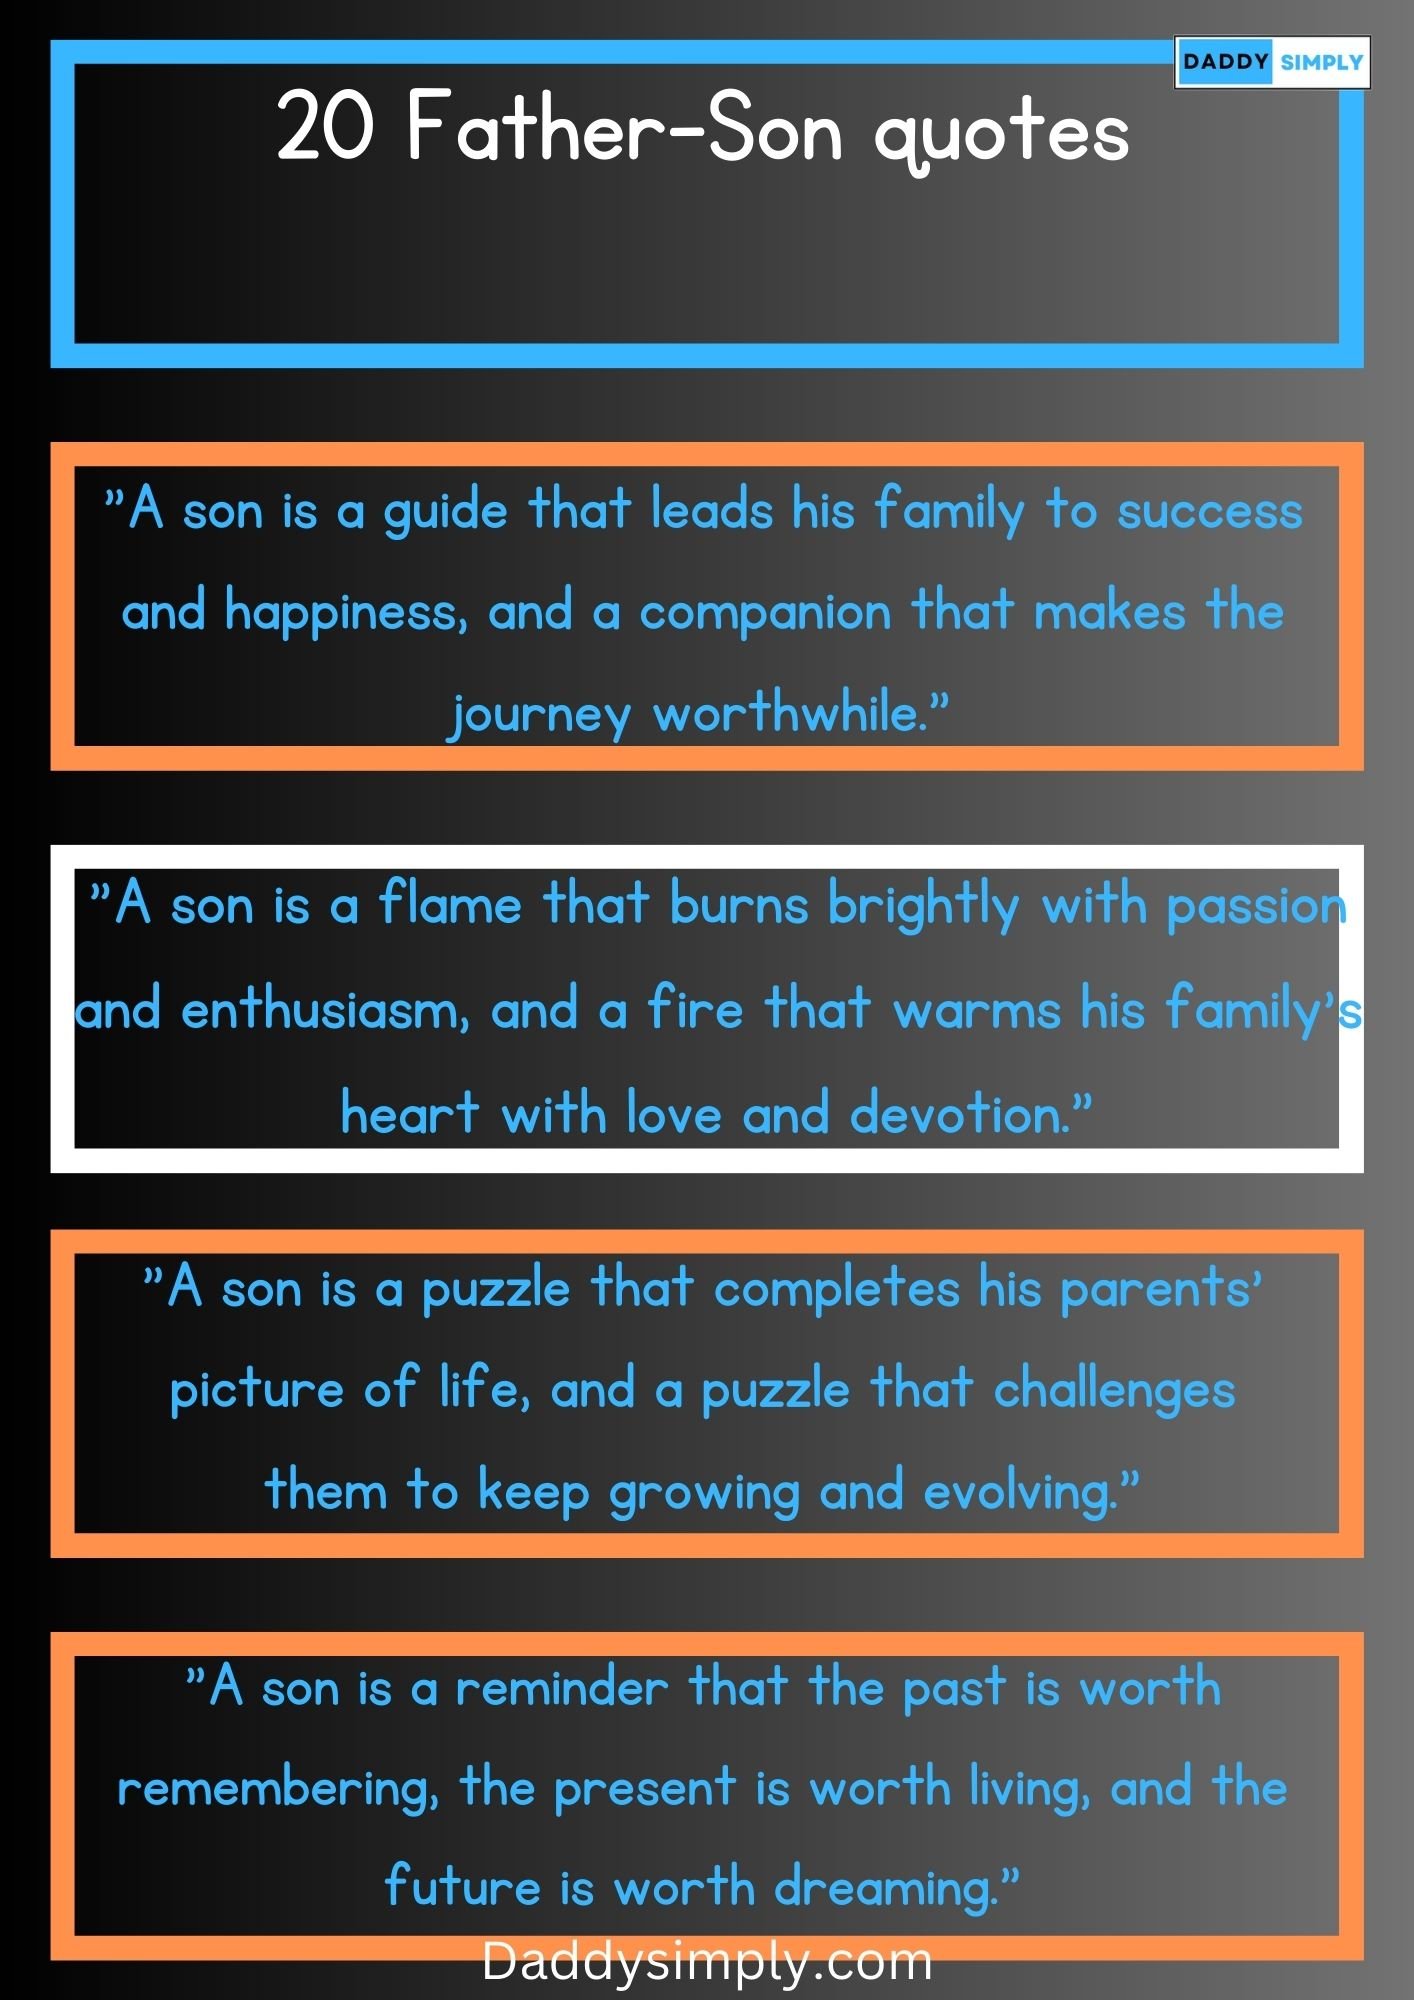 138+ Best Proud Father-Son Quotes and Messages - Daddy Simply